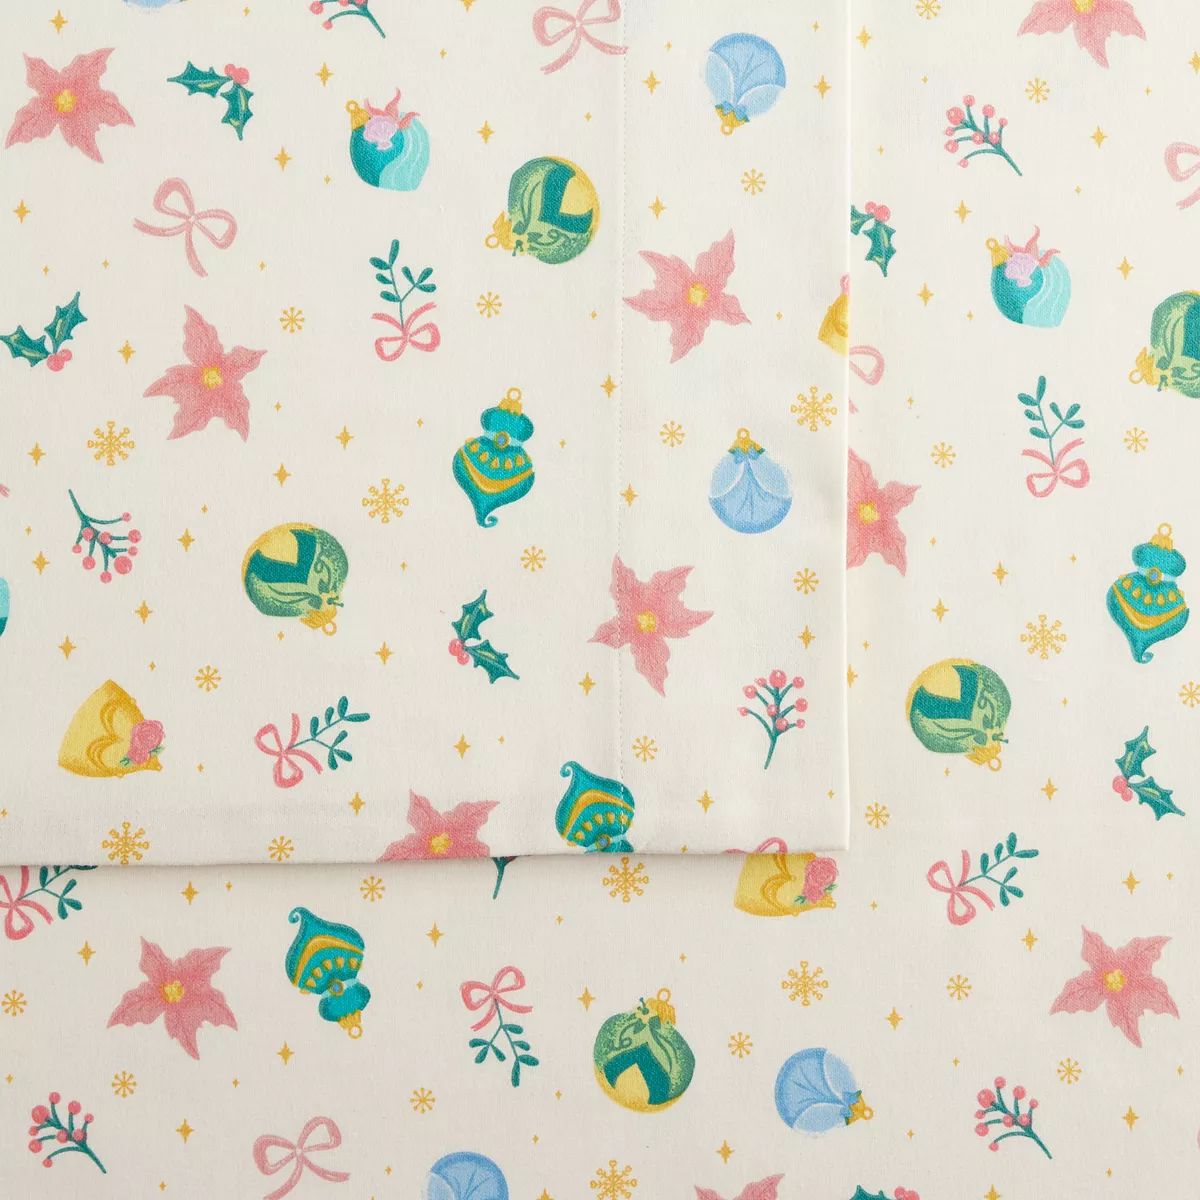 Disney's Flannel Sheet Set by The Big One® | Kohl's